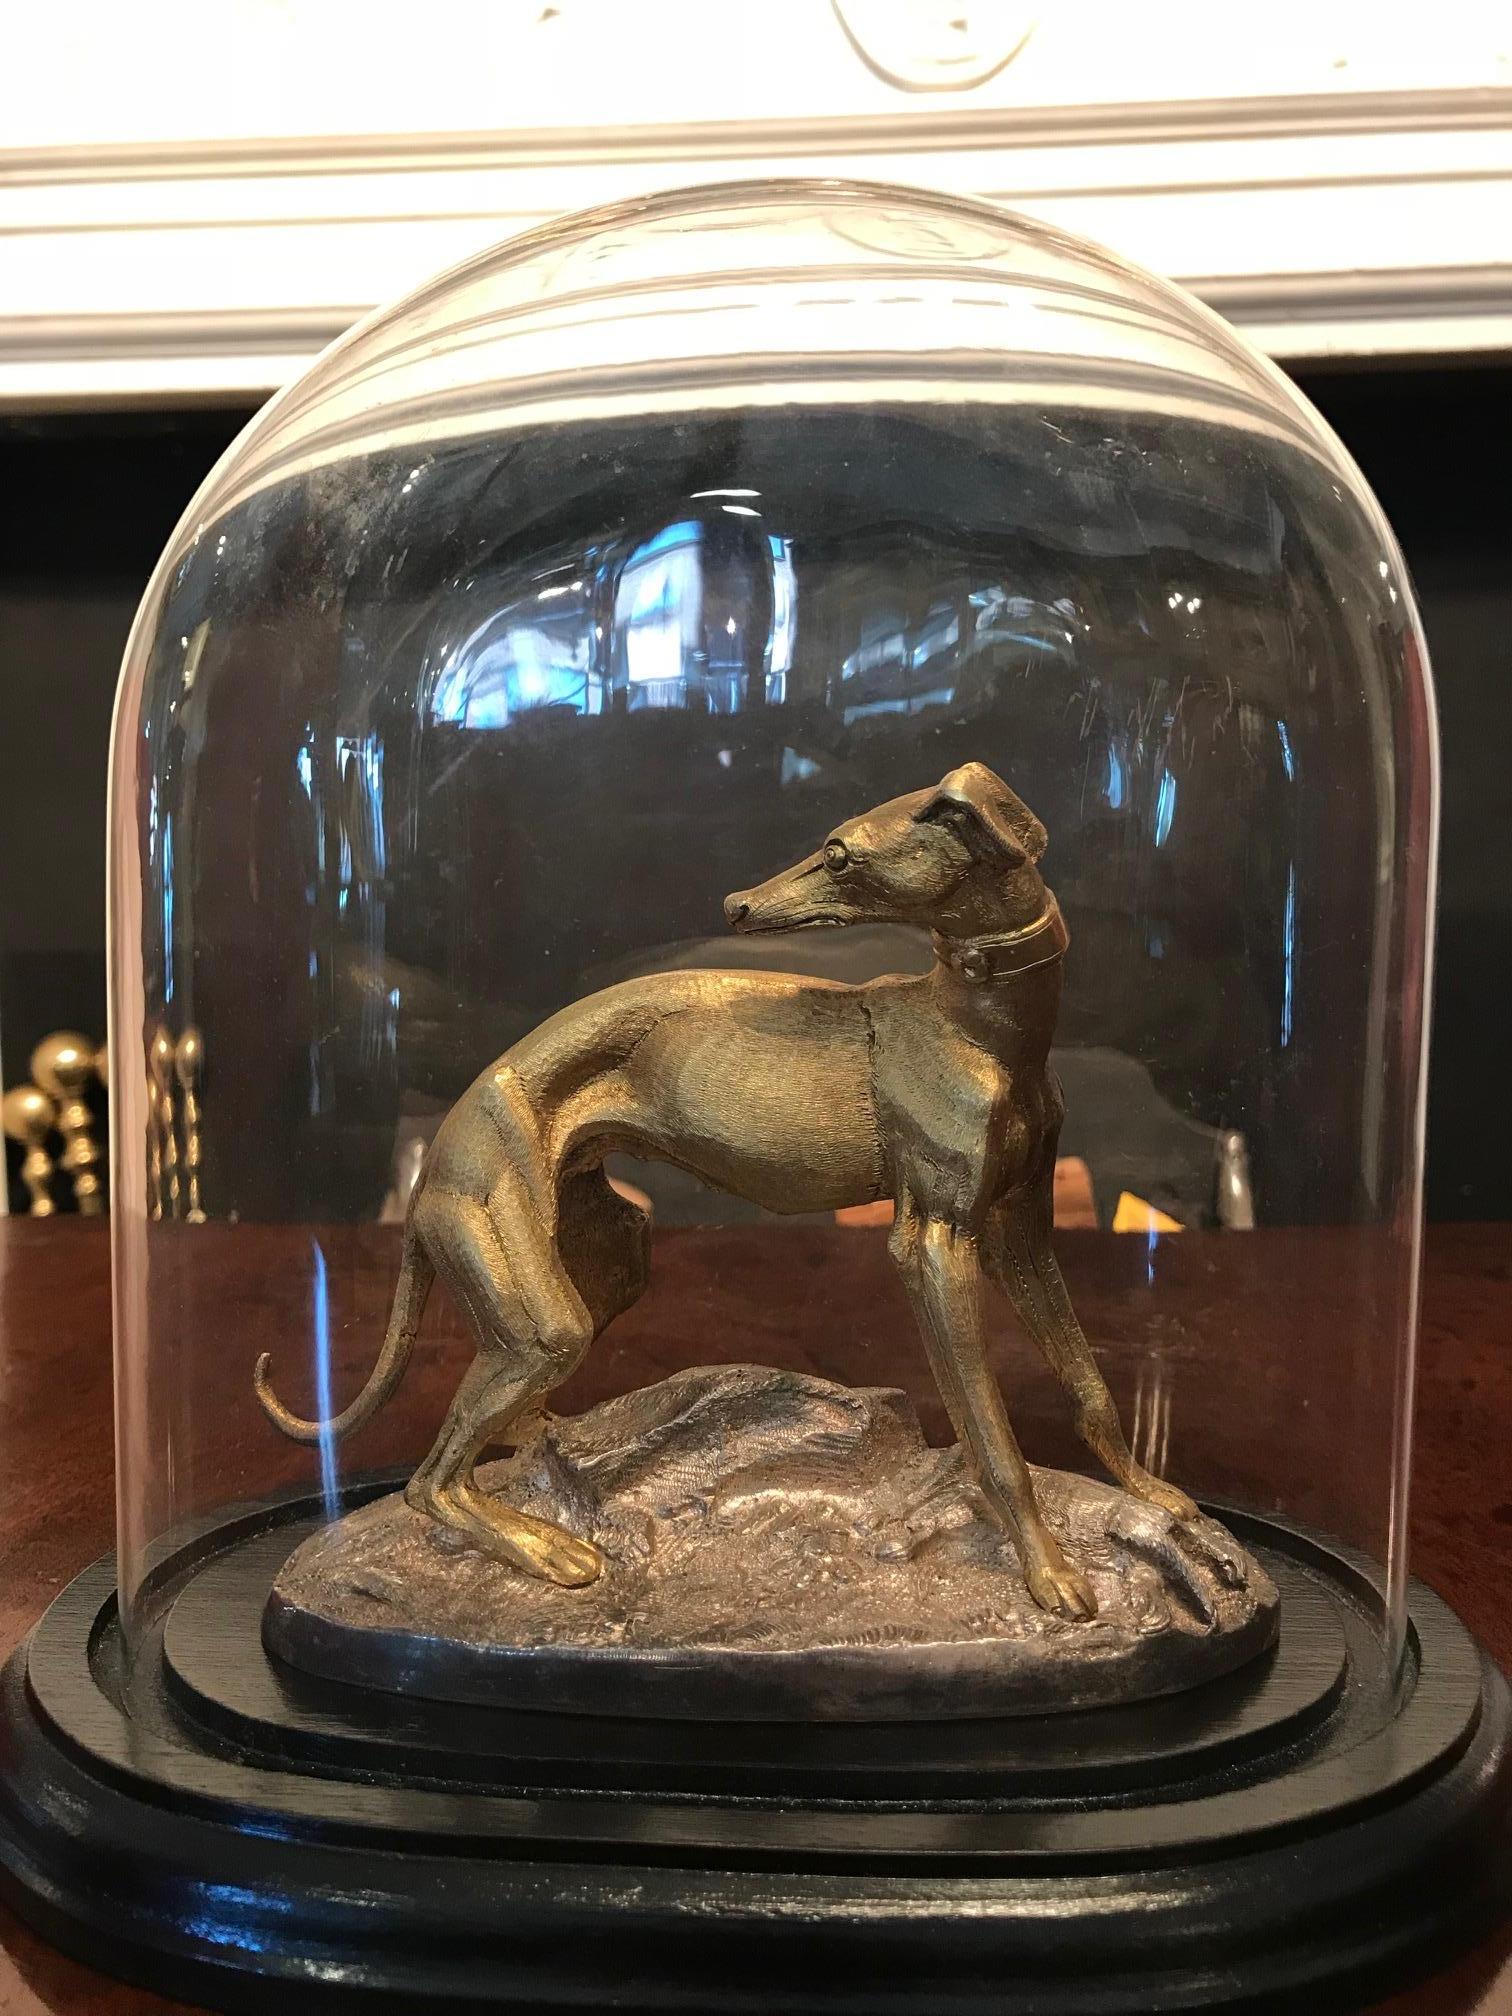 Early 19th Century Gilt Bronze Whippet within Glass Cloche Dome Display Case In Excellent Condition For Sale In Dublin 8, IE